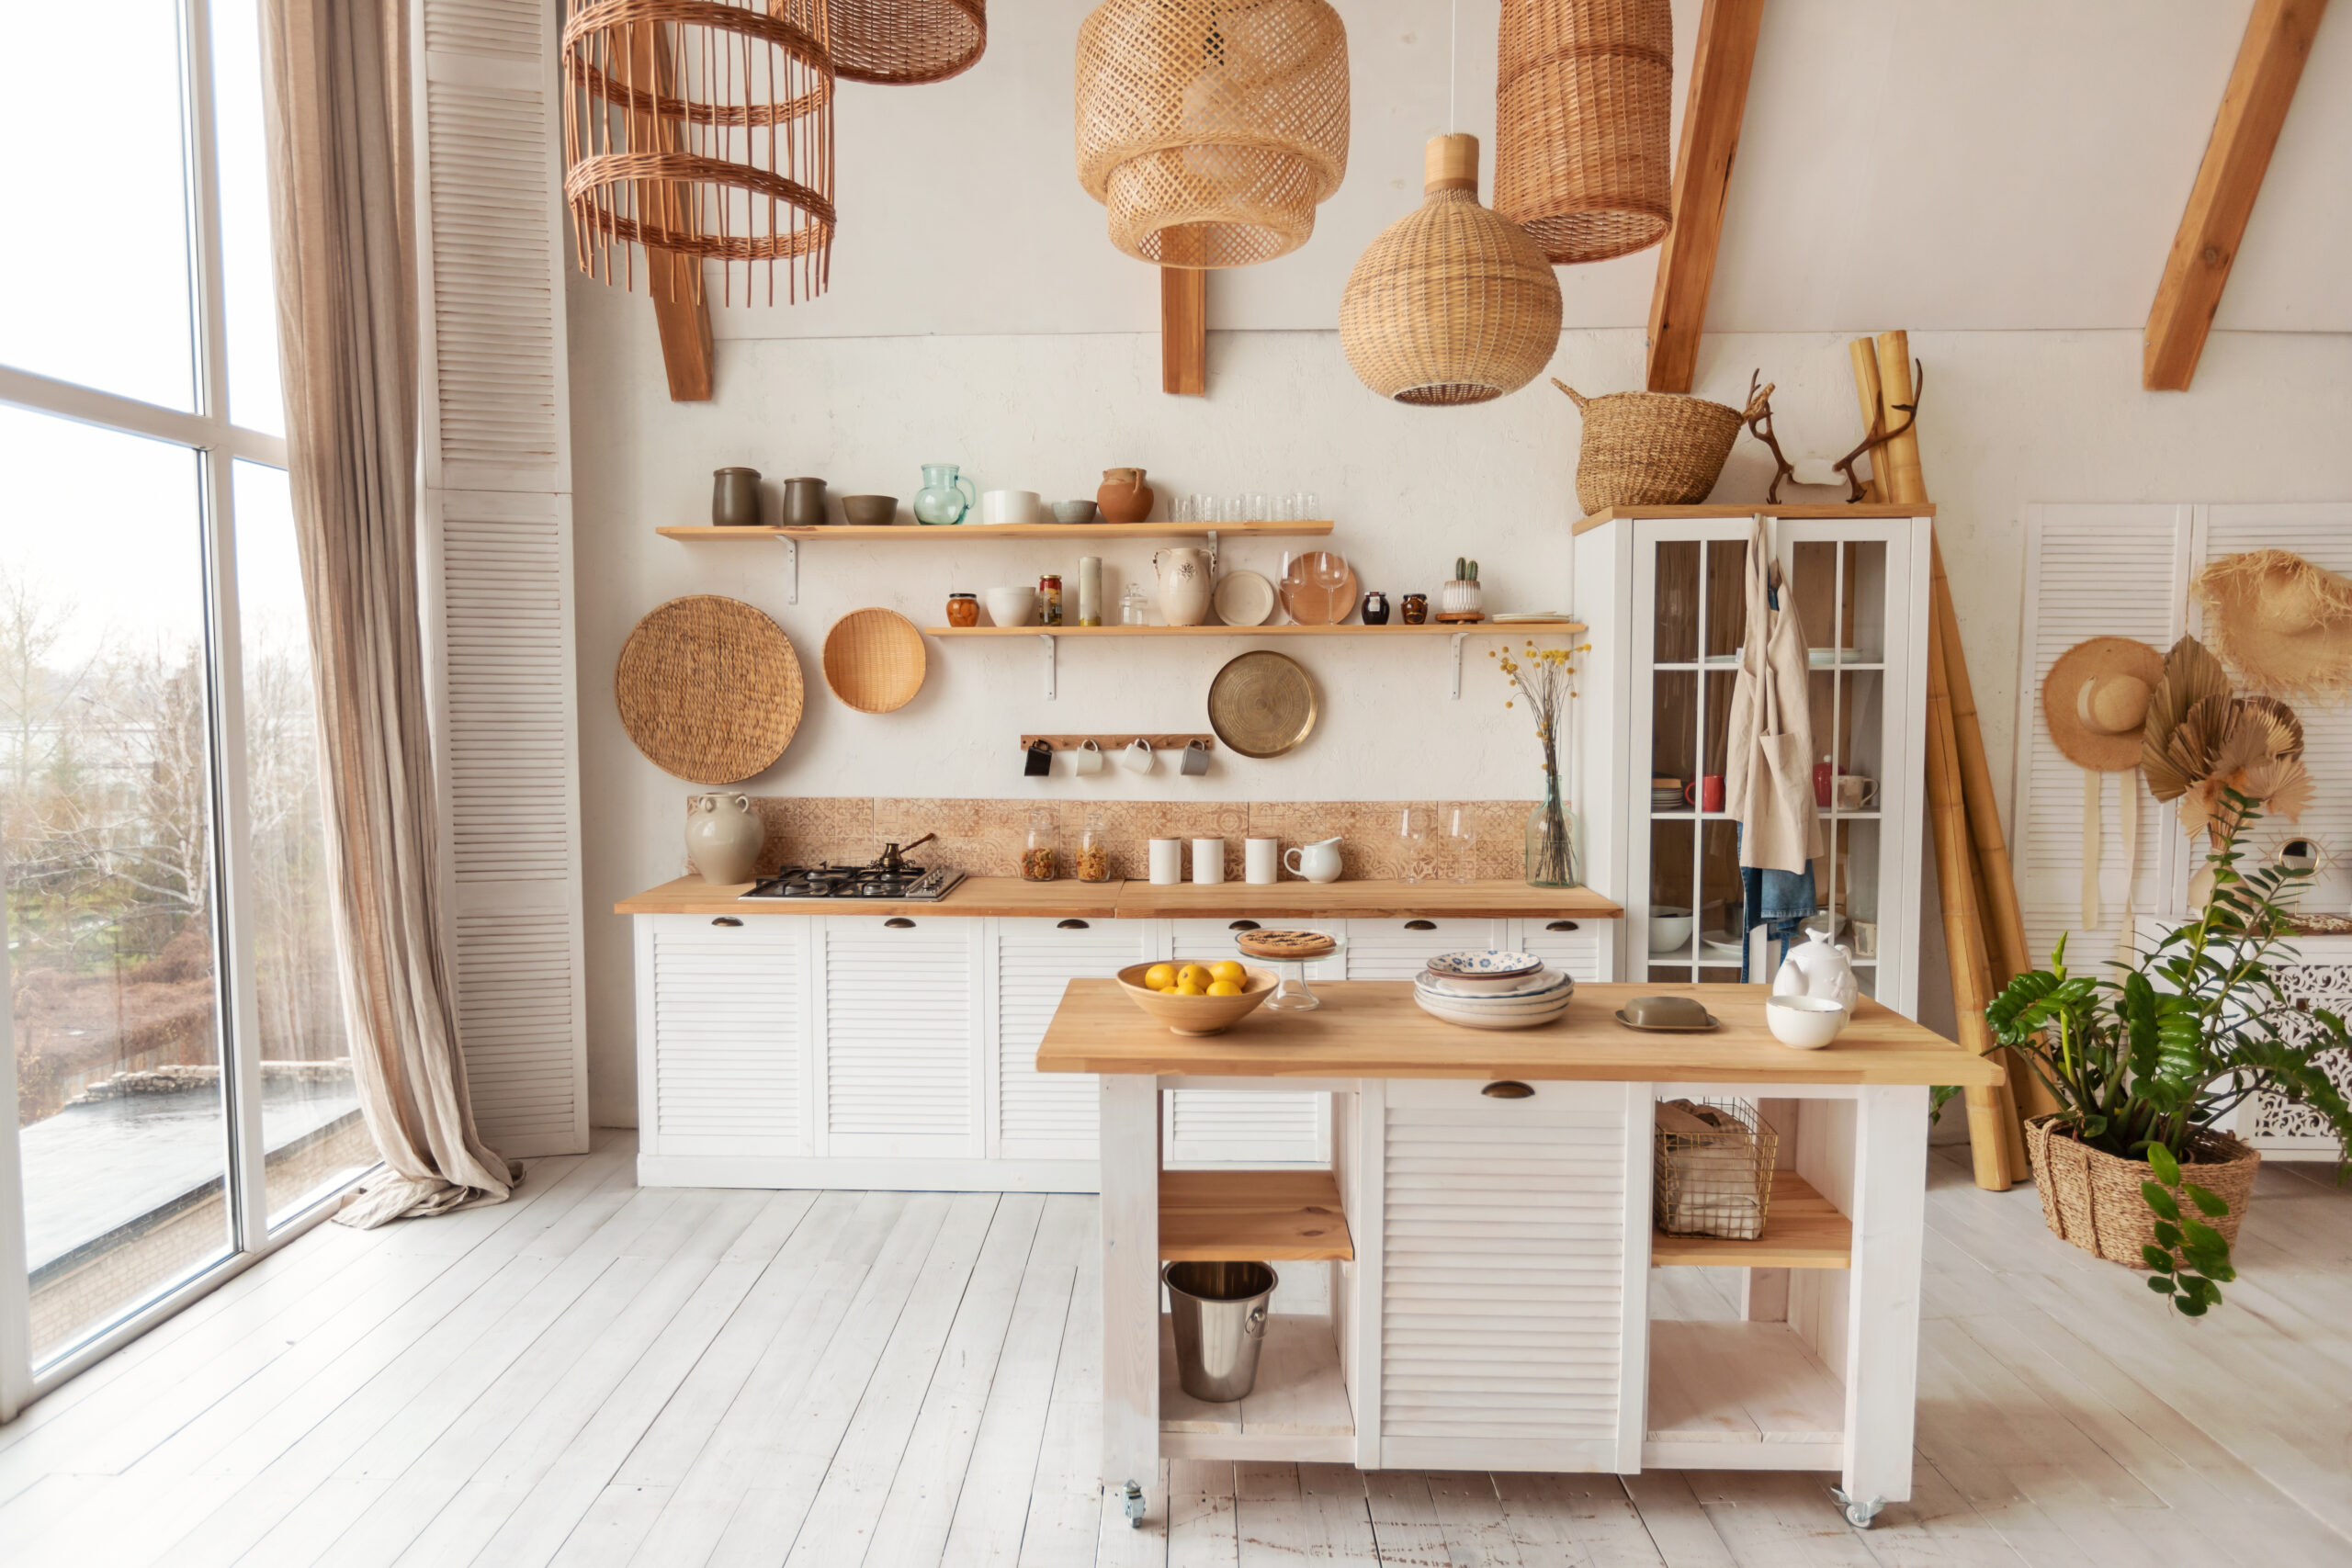 Bright natural kitchen with baskets and earthy decor.